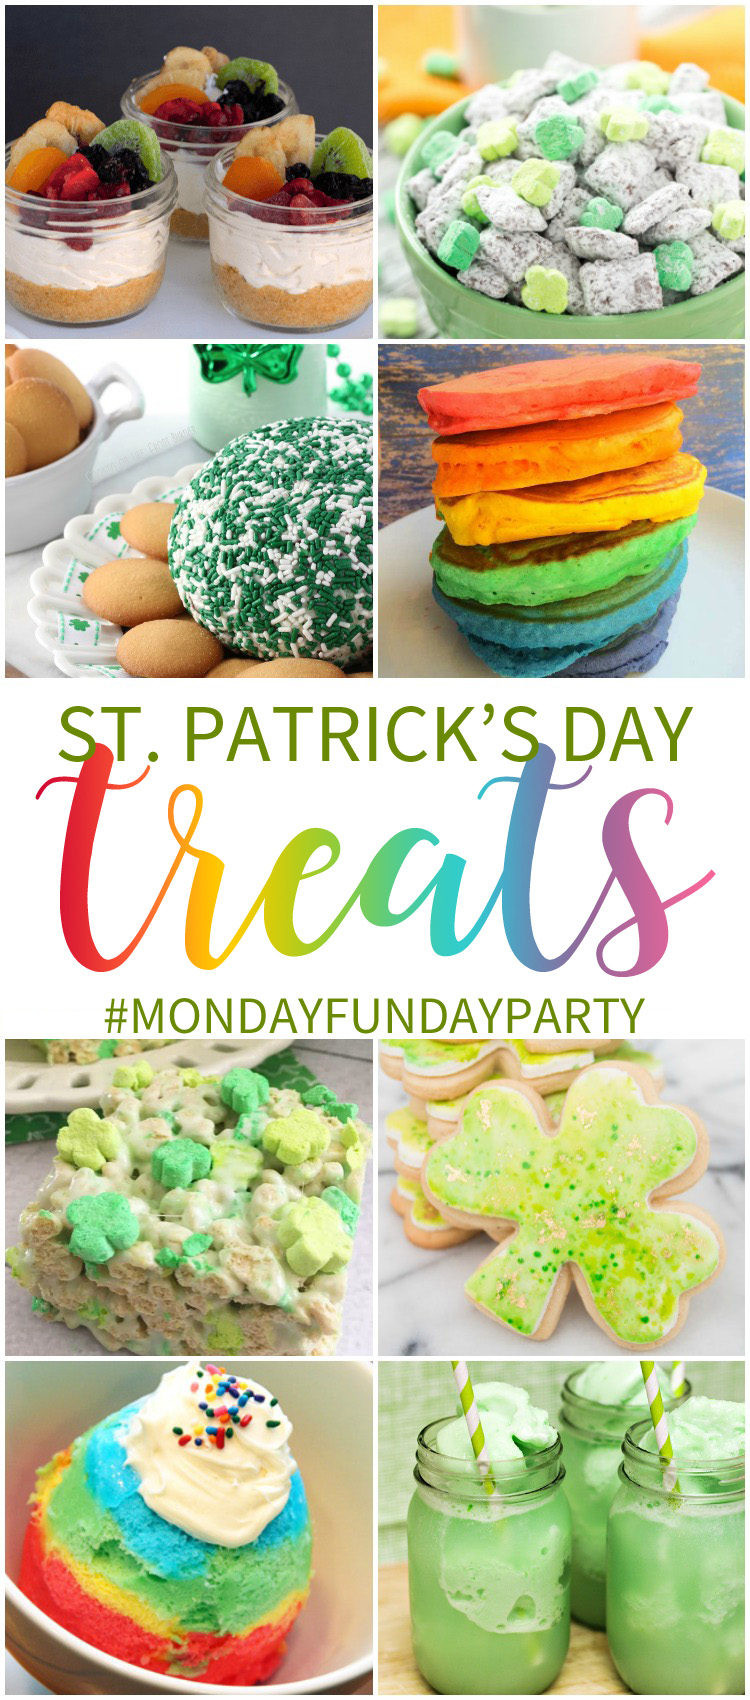 St Patrick's Day Meal Ideas
 8 Great St Patrick s Day Recipe Treat Ideas